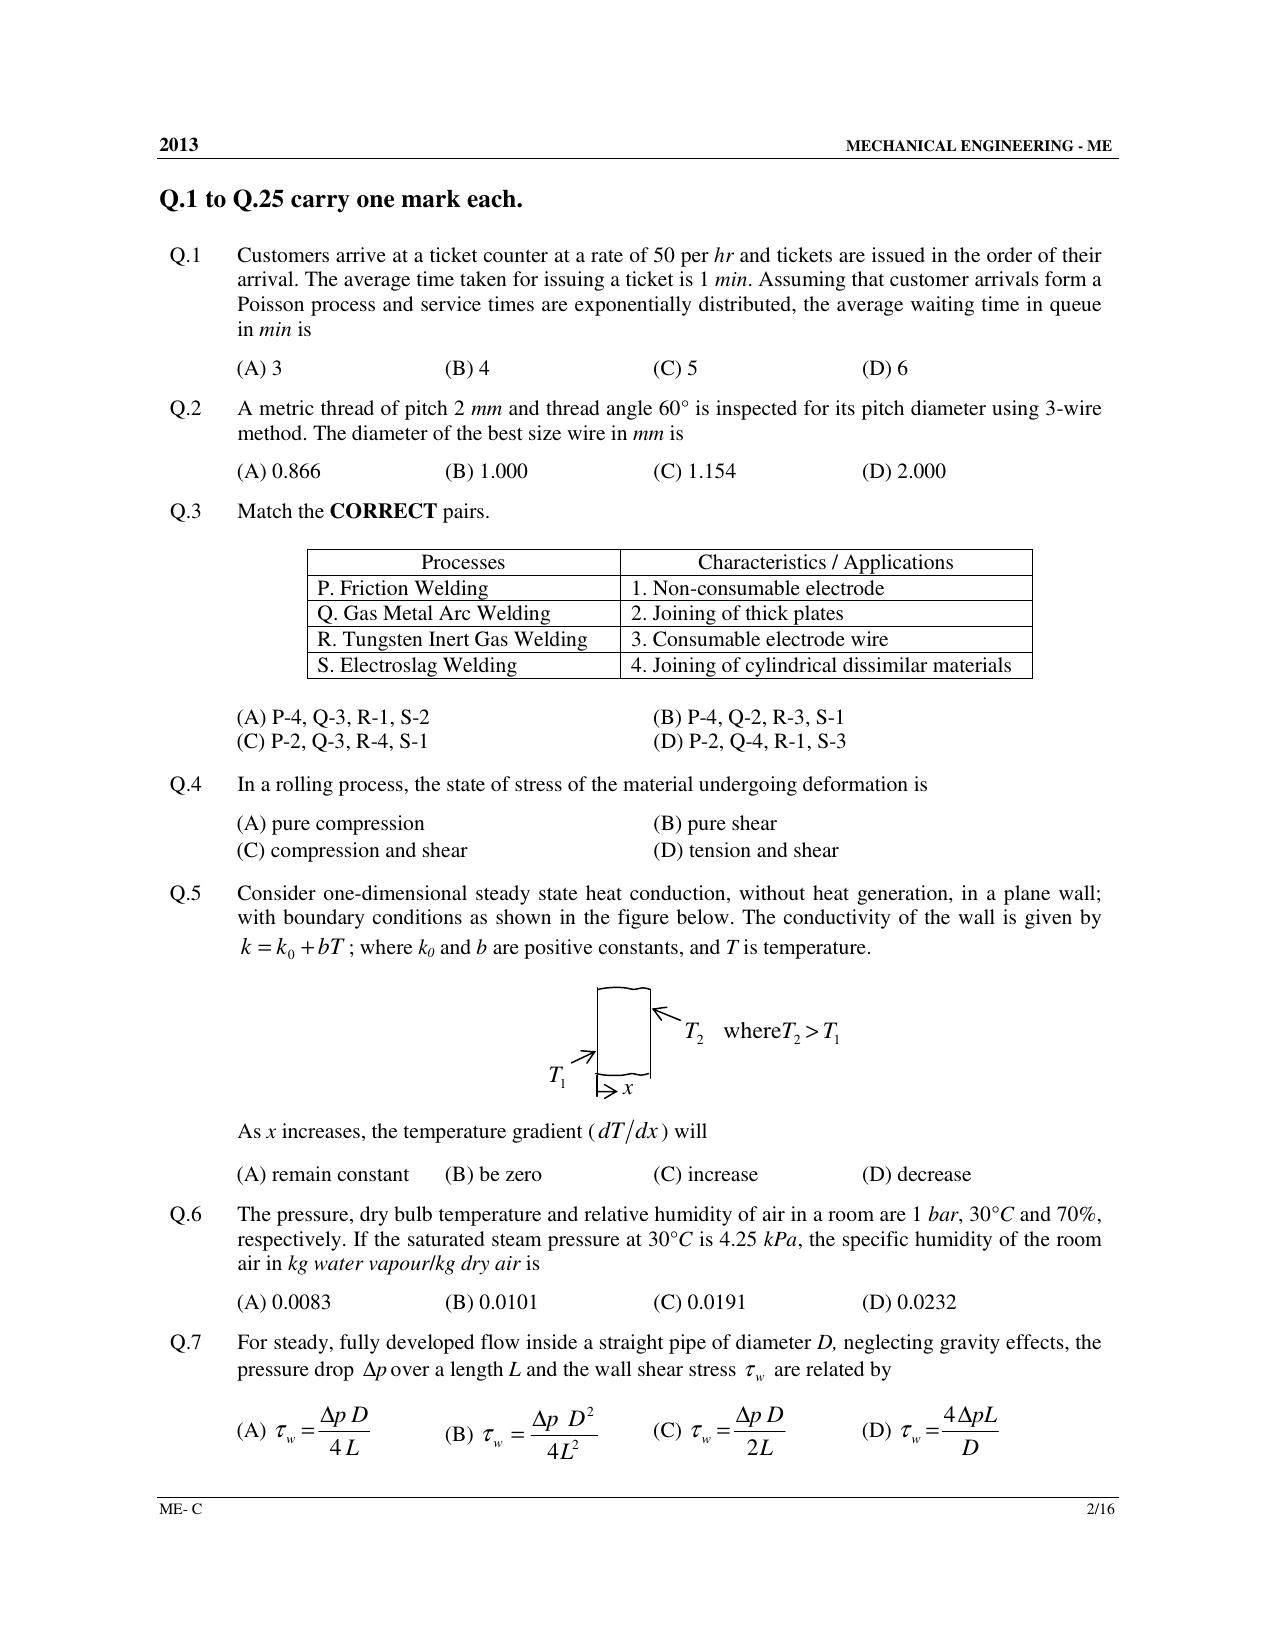 GATE 2013 Mechanical Engineering (ME) Question Paper with Answer Key - Page 31